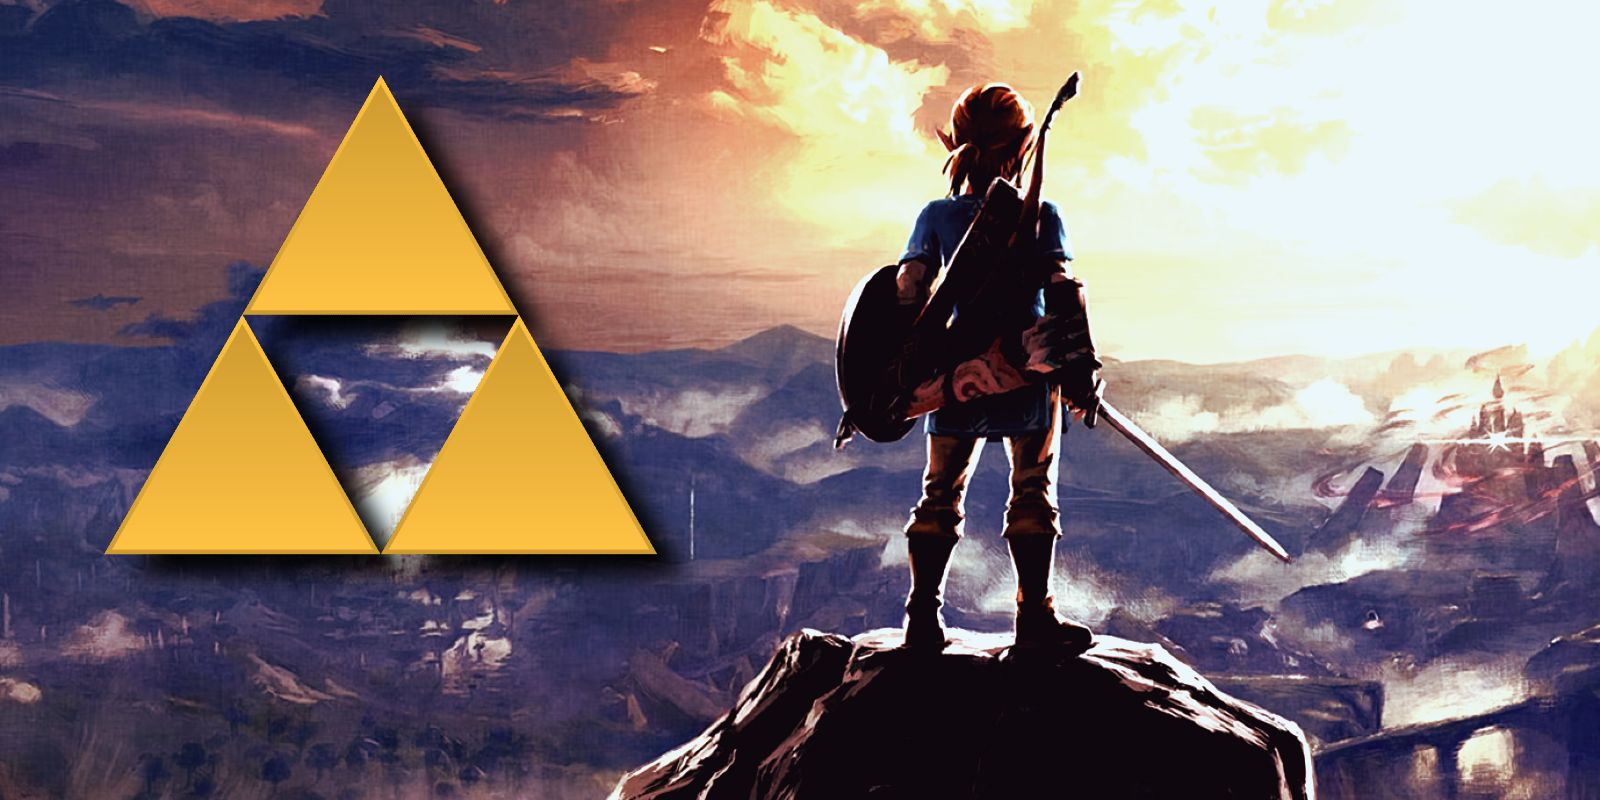 This collage shows Link in front of Hyrule with the Triforce next to it.